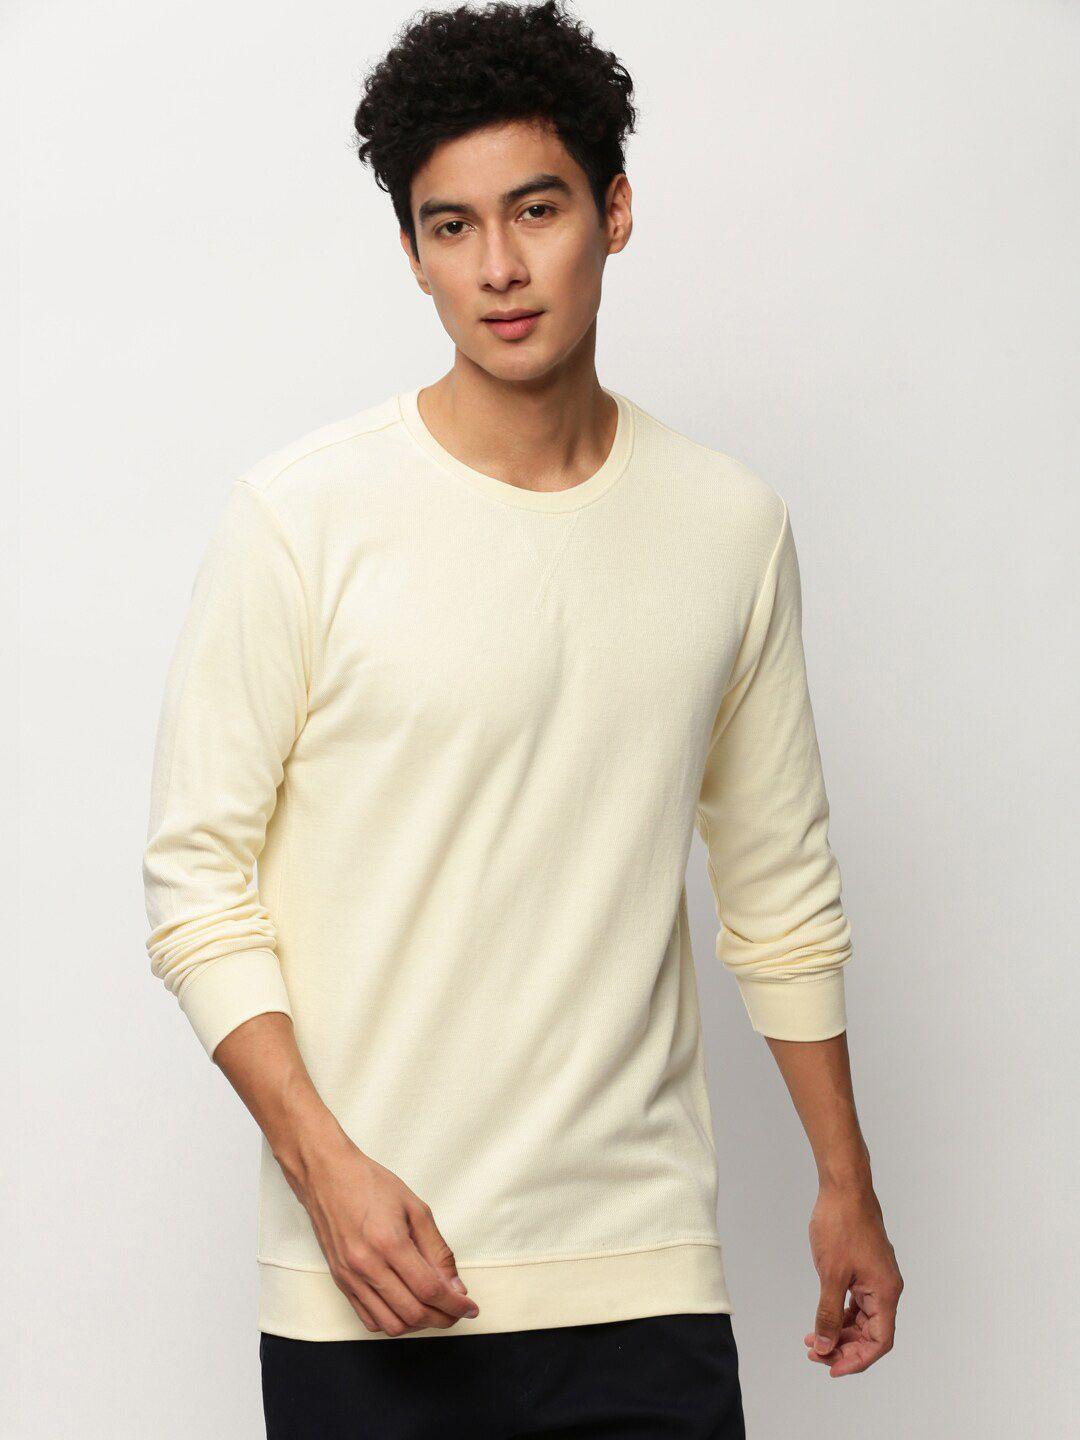 showoff-round-neck-long-sleeves-cotton-pullover